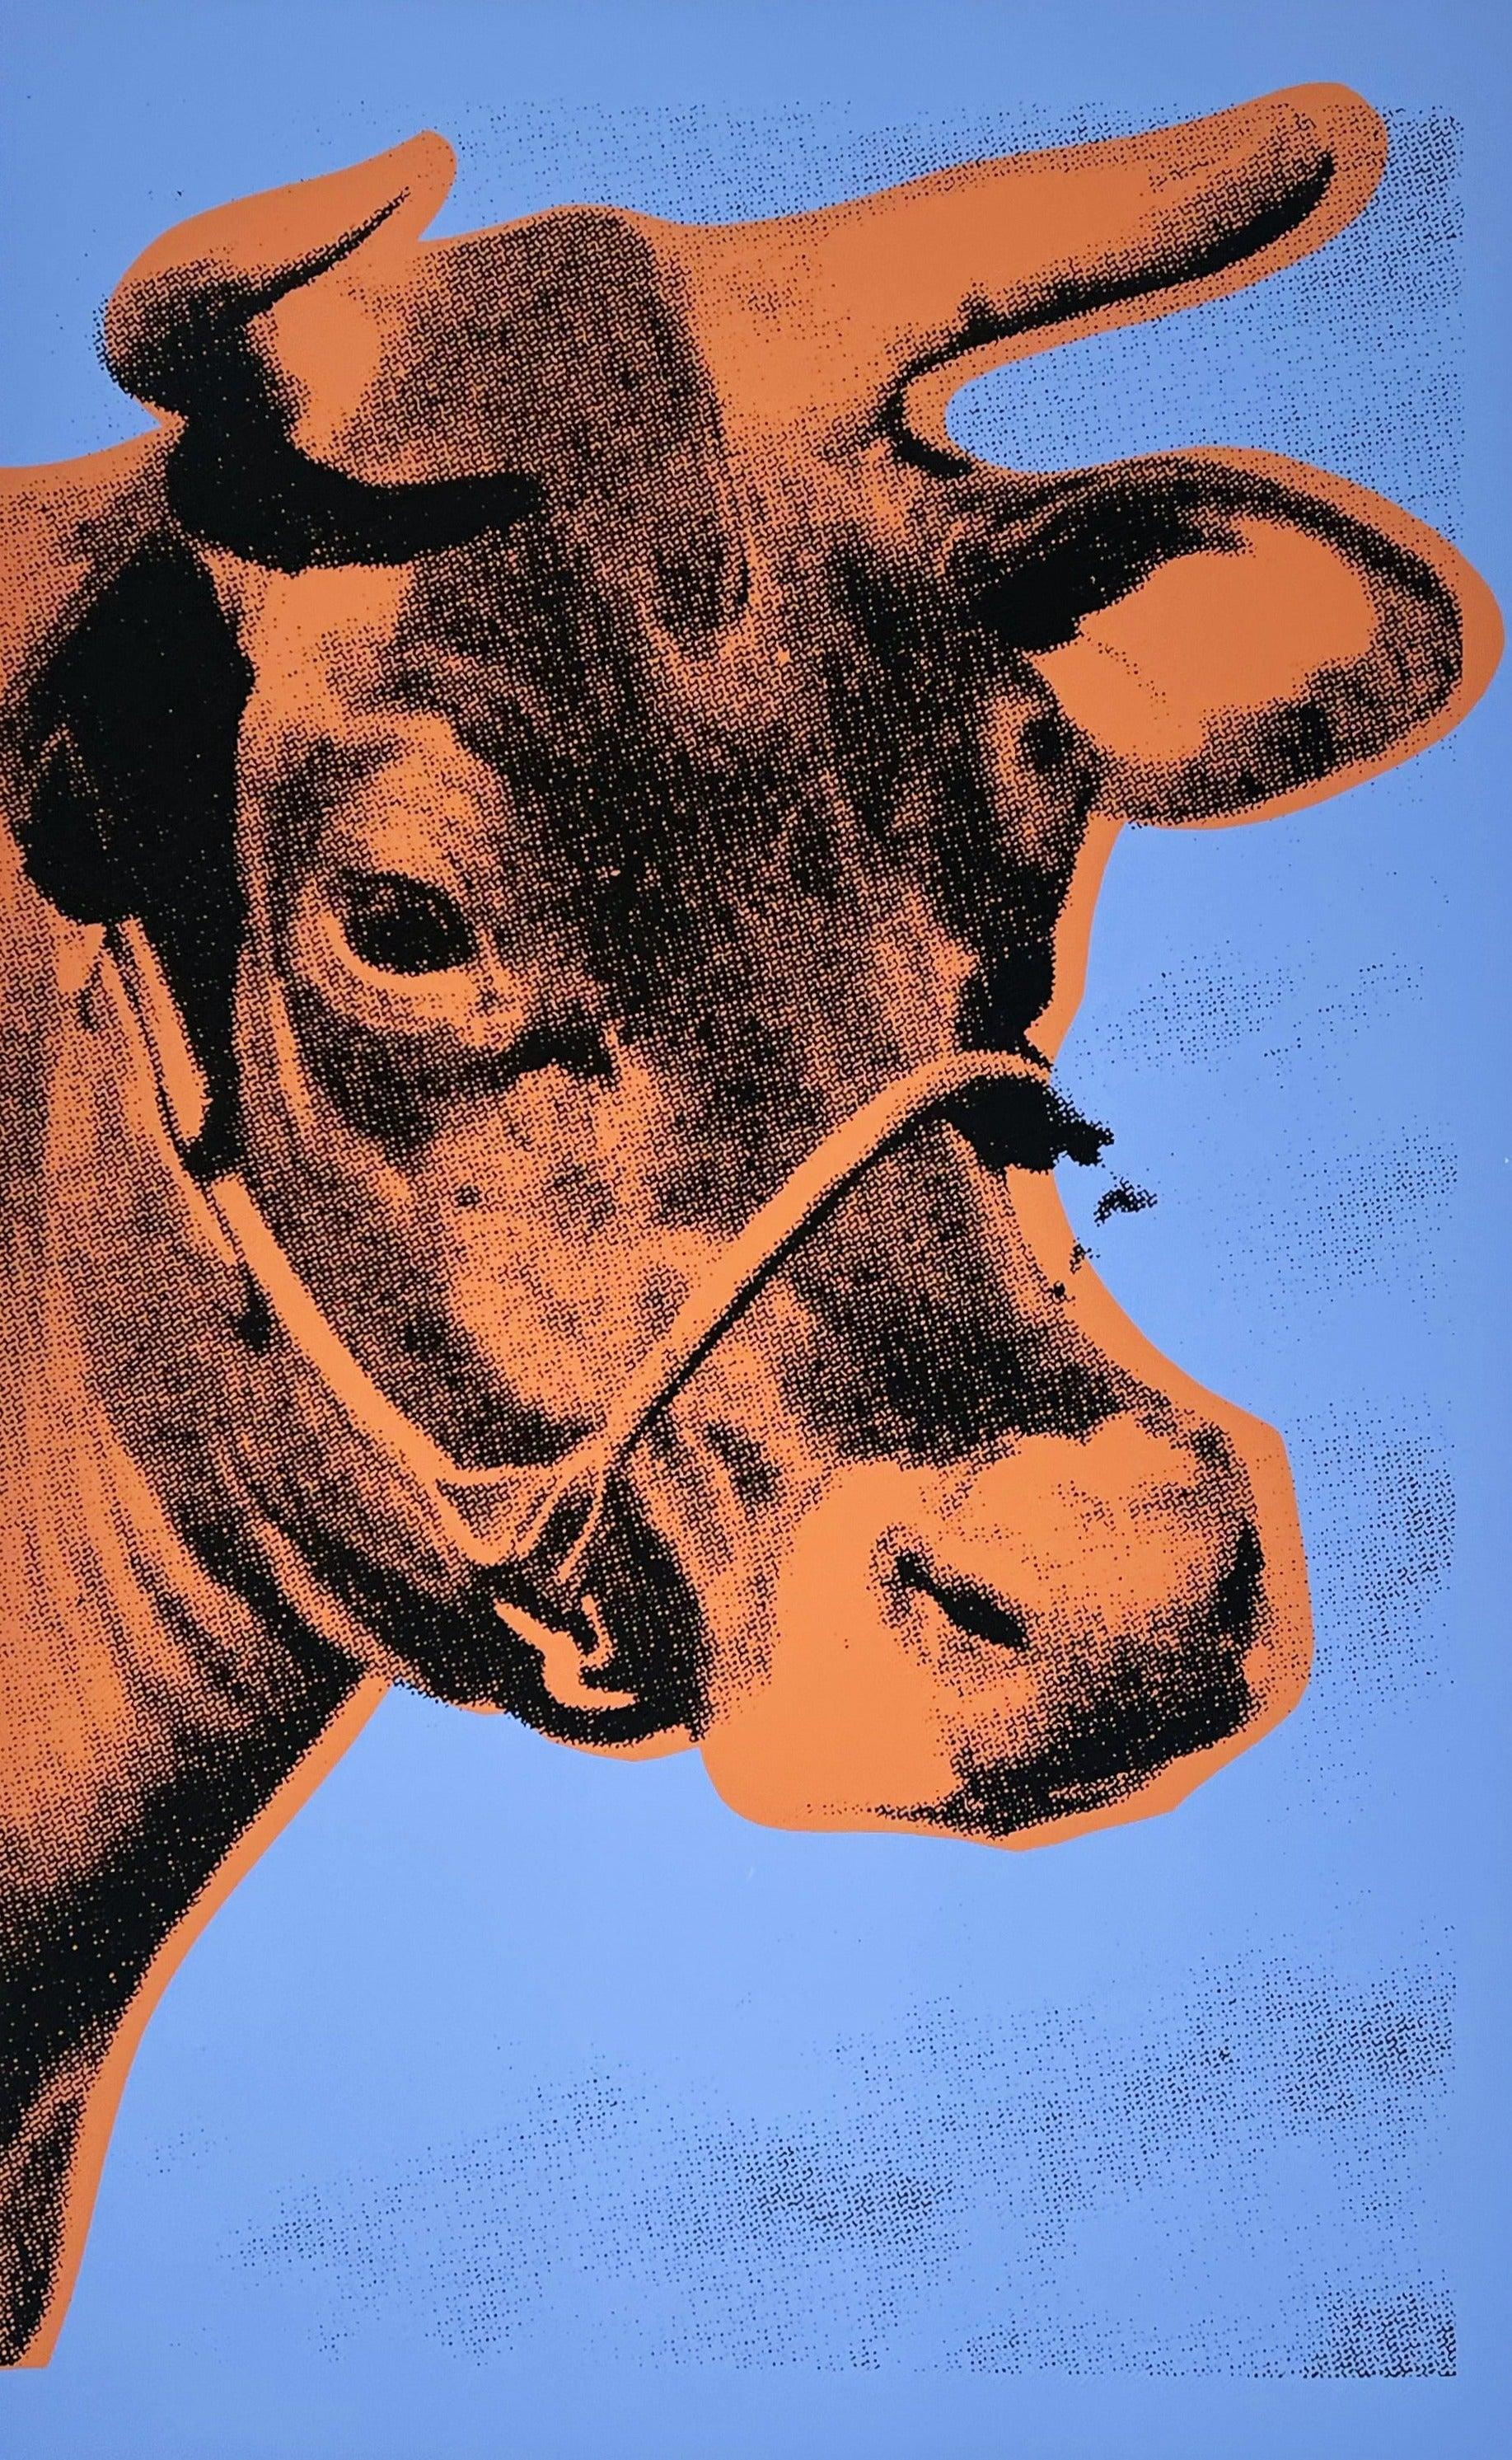 Artist: Andy Warhol
Title: Cow
Medium: Screenprint on wallpaper
Date: 1971
Edition: Unlimited, with approximately 100 signed in felt pen in 1979
Frame Size: 51 3/4" x 35 1/2"
Sheet Size: 45 1/2" x 29 3/4"
Signature: Unsigned (Andy Warhol Art